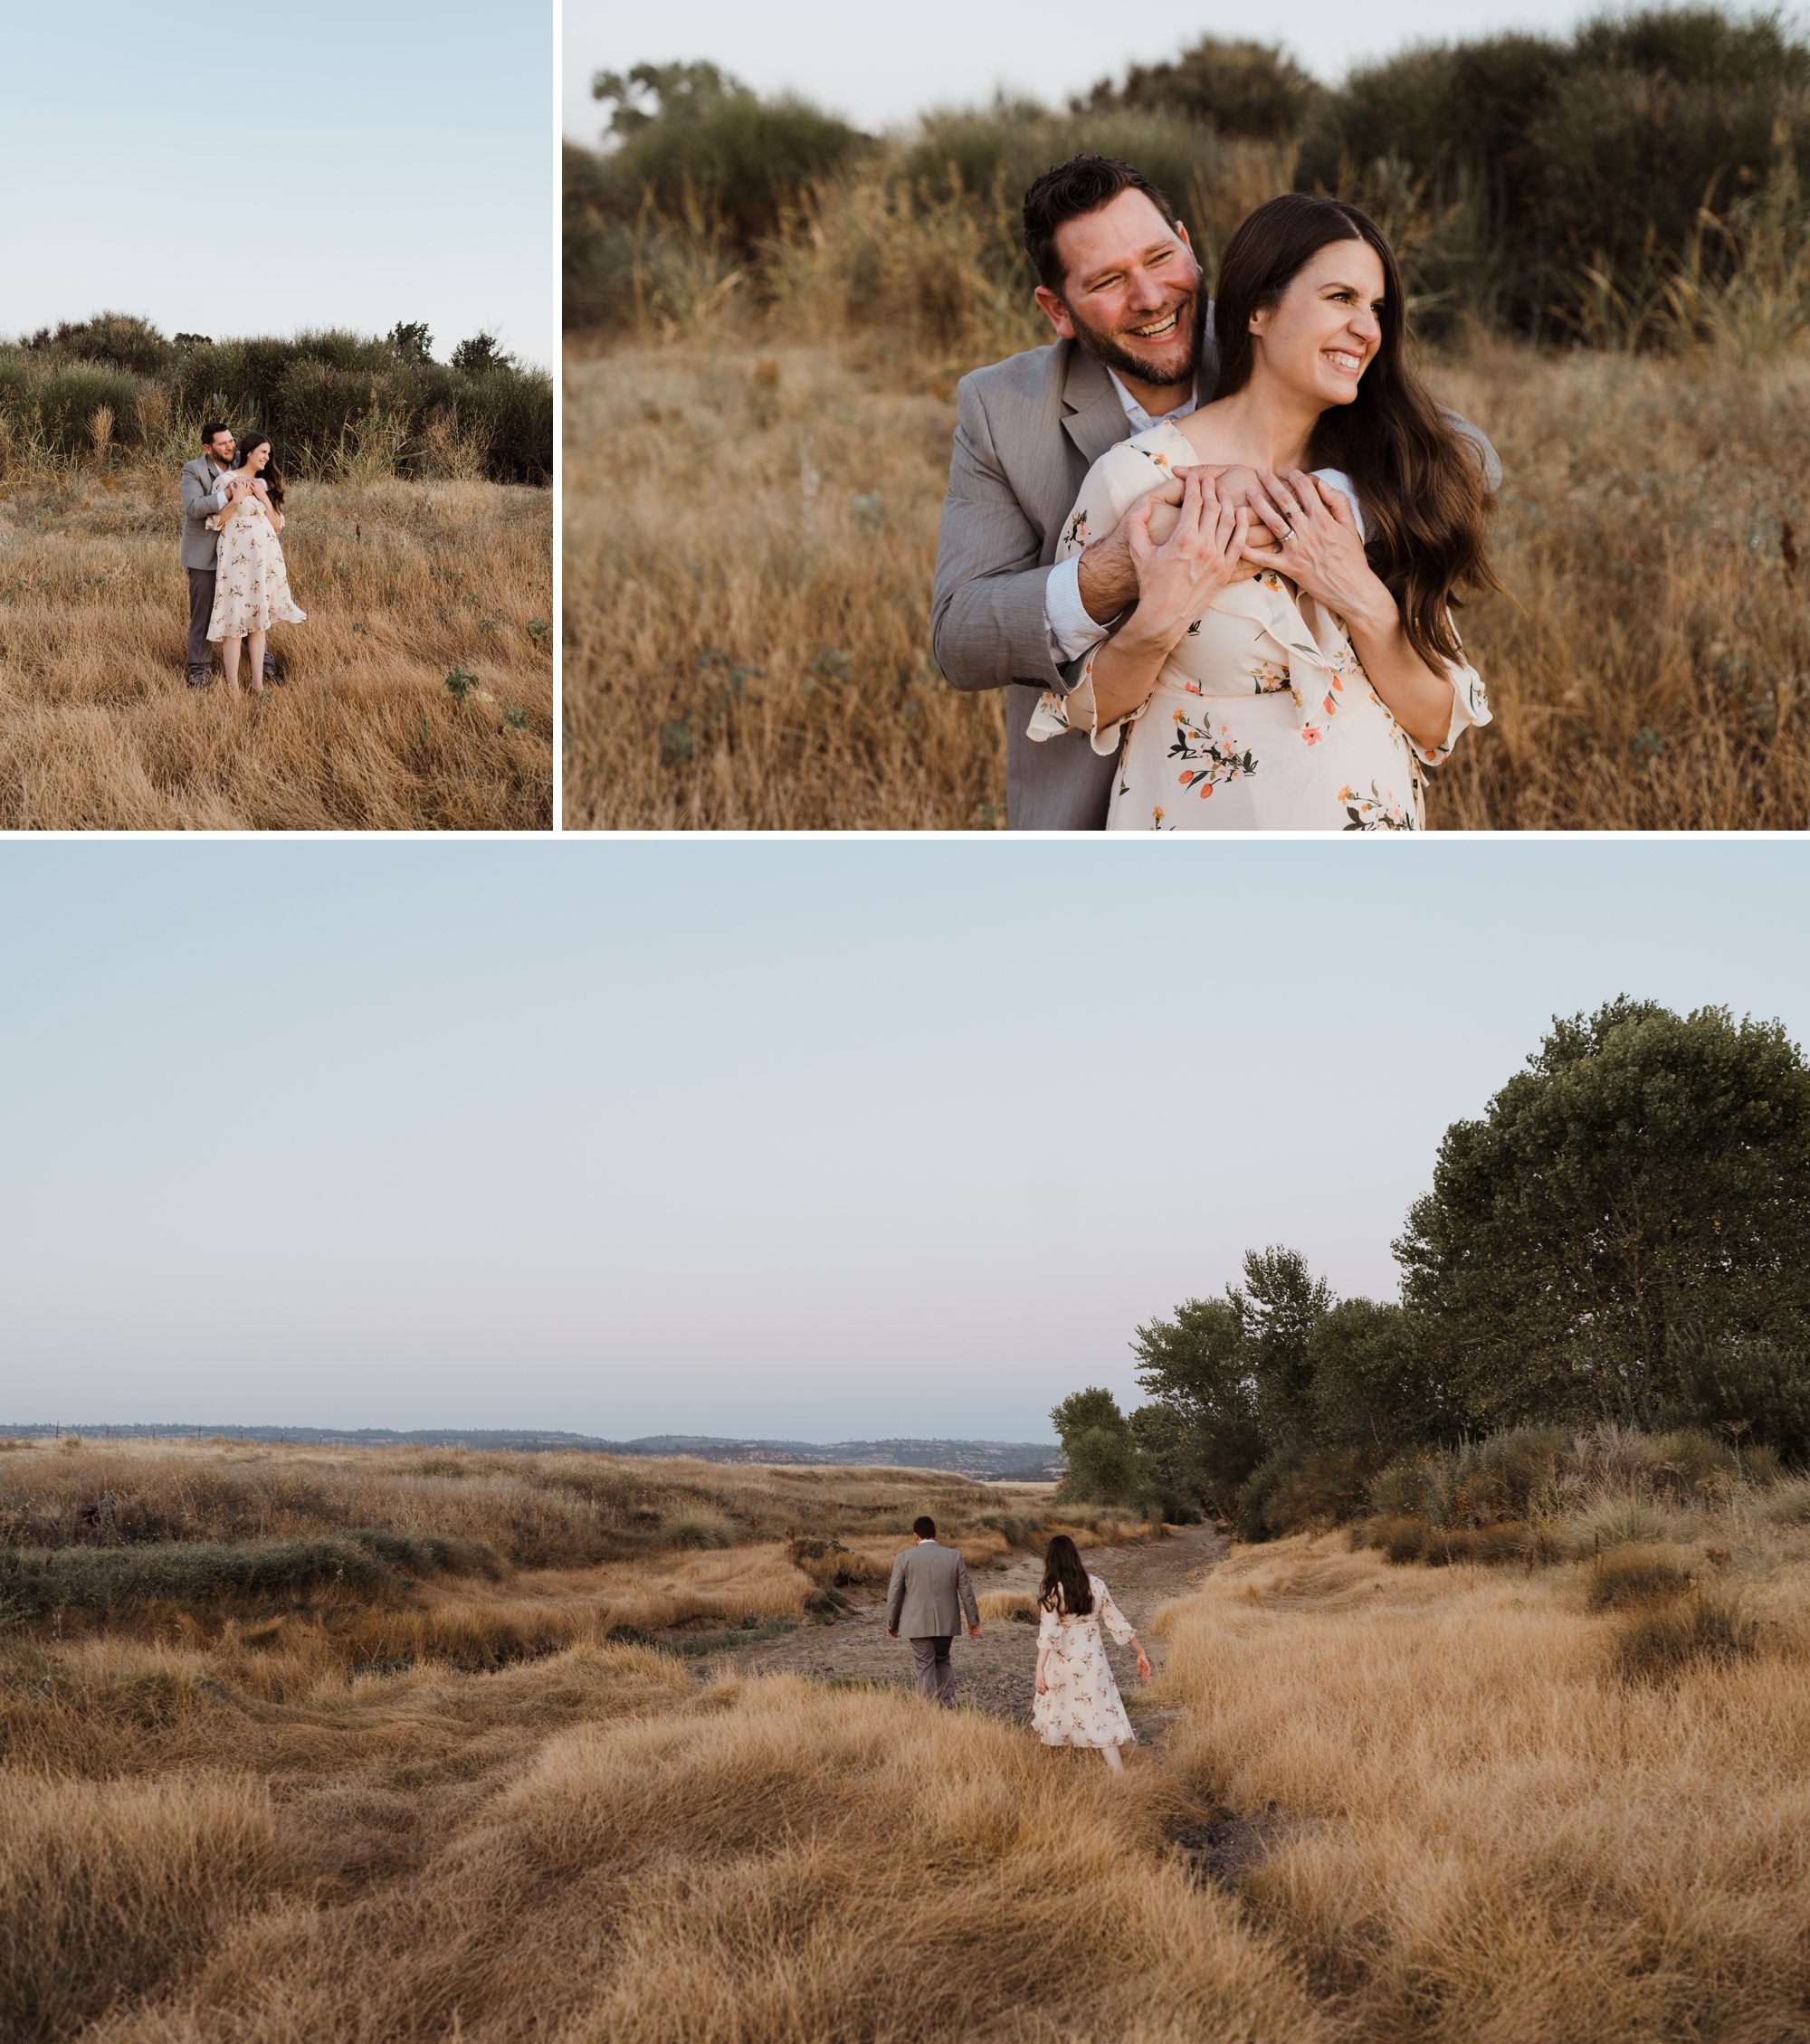 Adorable California maternity session by Portland photographers - Briana Morrison Photography